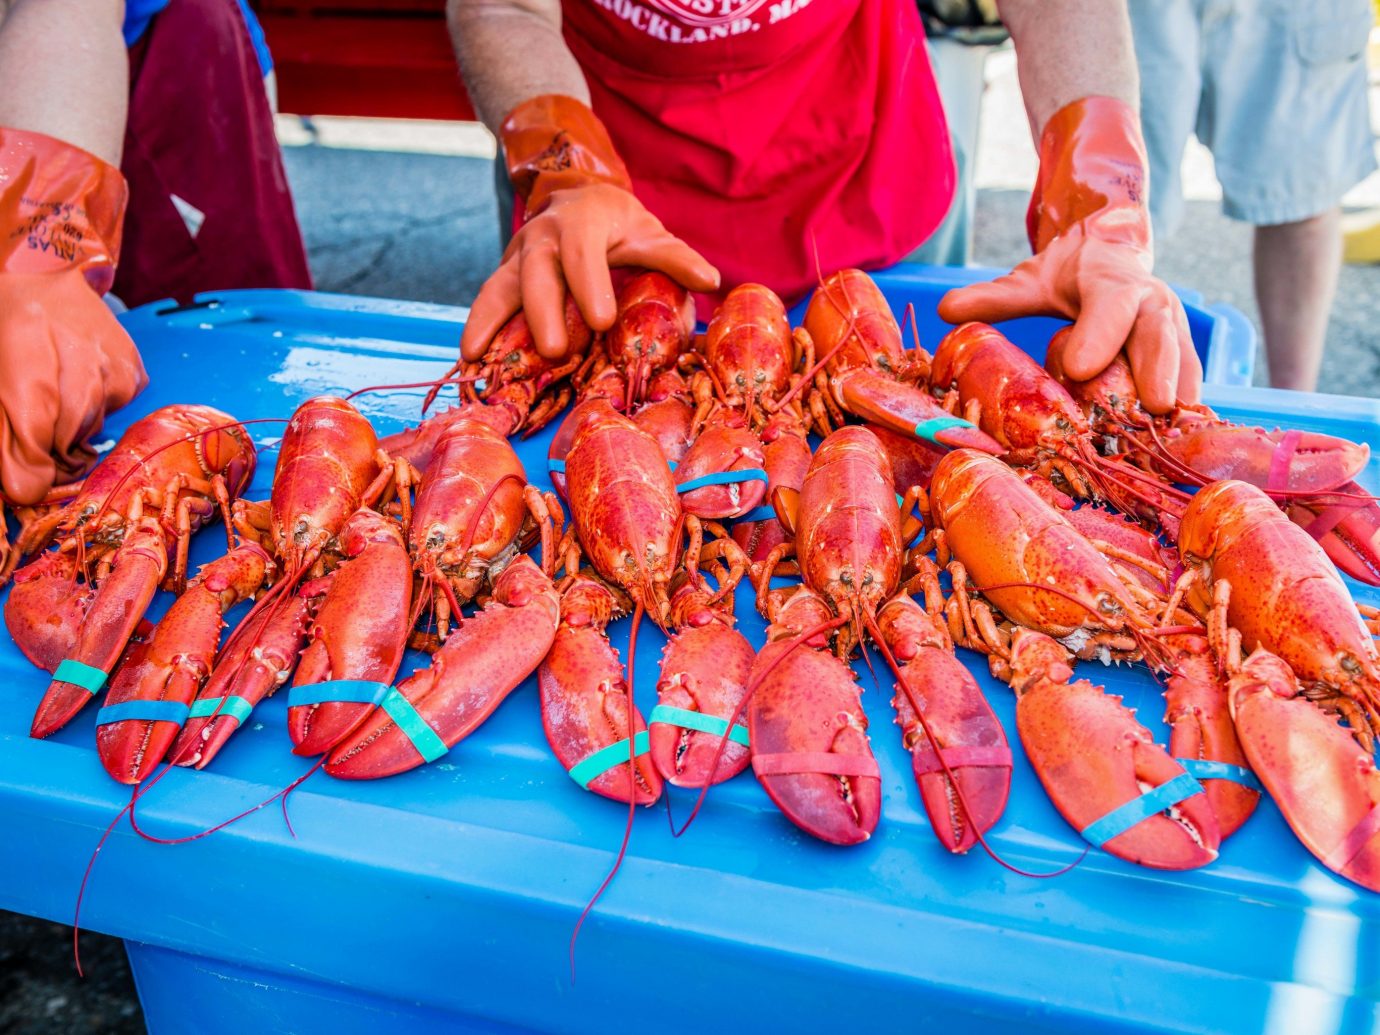 Maine Lobster Festival Offbeat arthropod invertebrate animal person carrot Seafood food blue american lobster lobster decapoda crustacean animal source foods seafood boil crab king crab homarus dungeness crab crab boil new england clam bake homarus gammarus crab meat crayfish spiny lobster